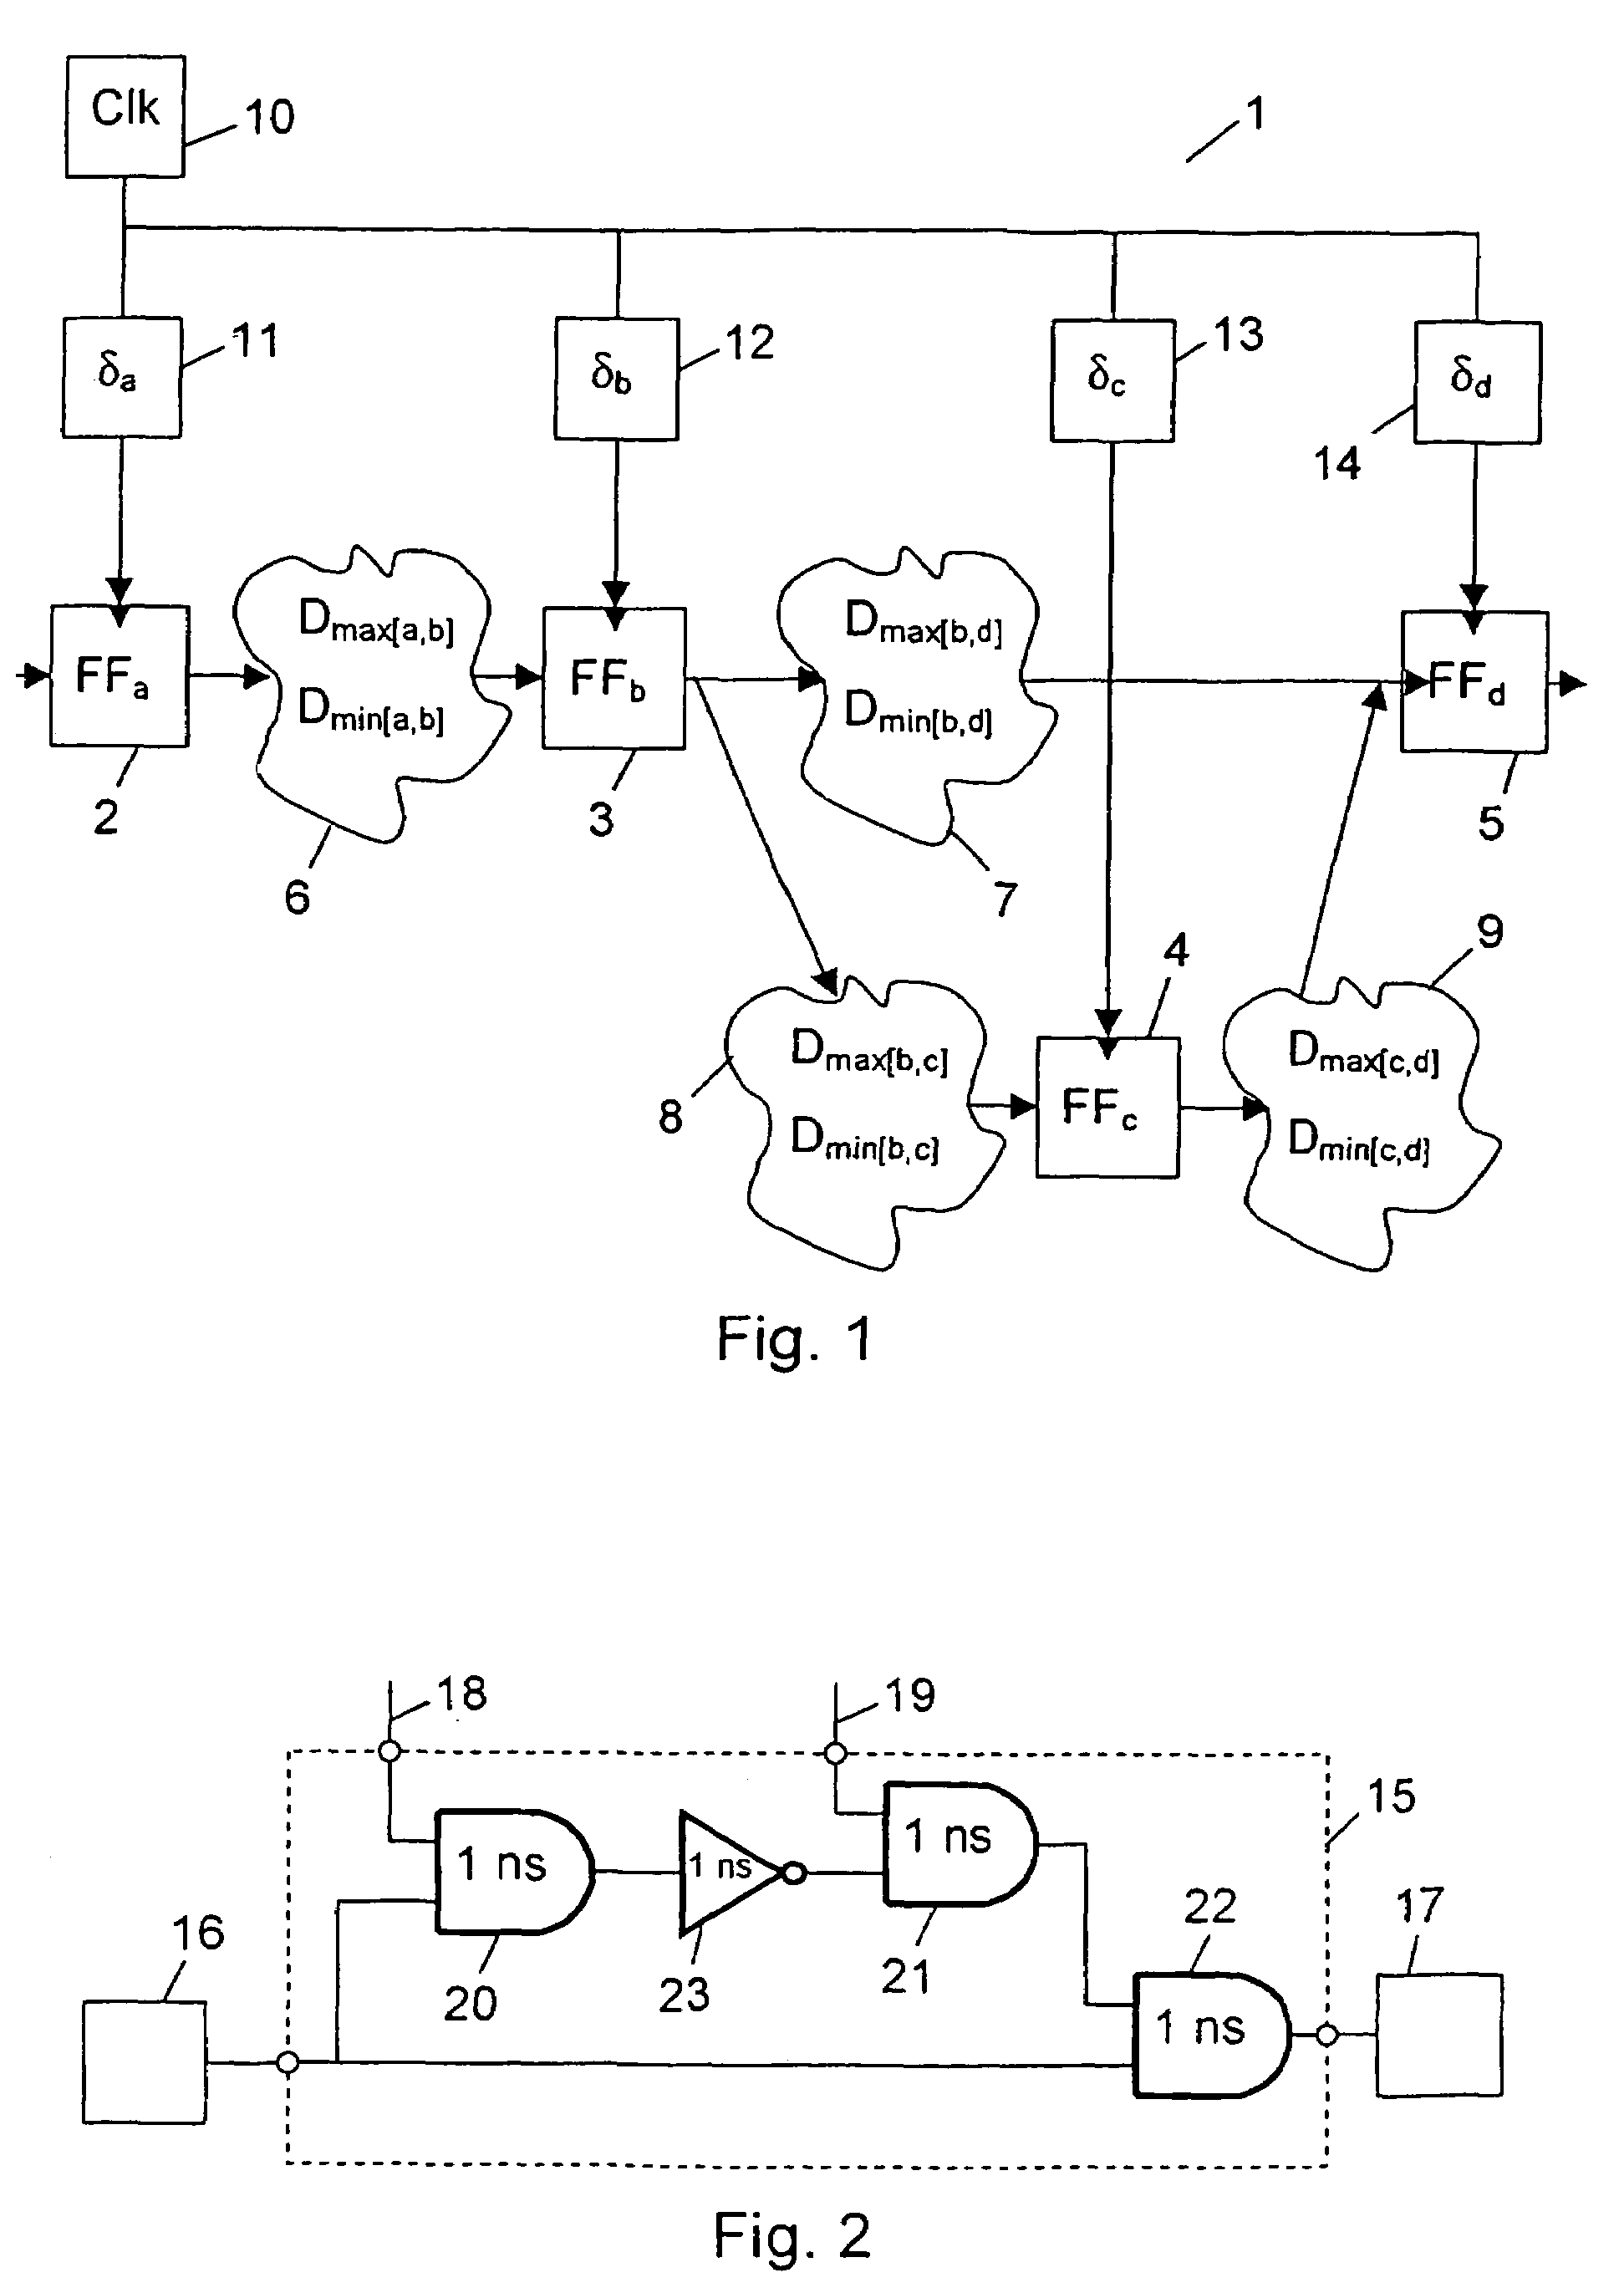 Optimization of the design of a synchronous digital circuit